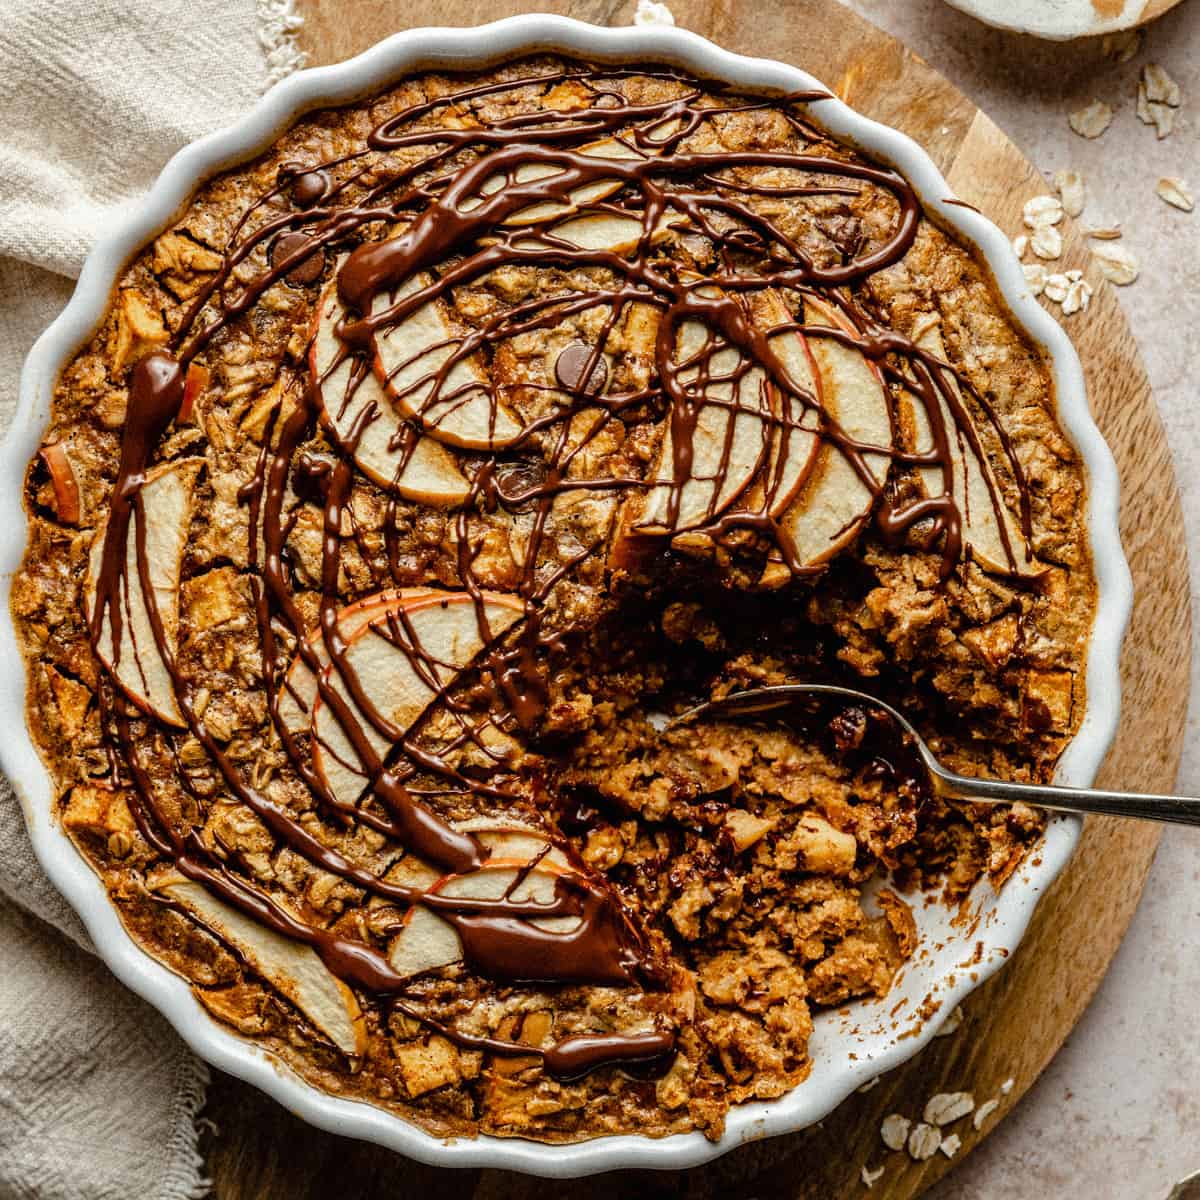 A baked oatmeal half served up from a dish on a wooden board with a spoon and napkin. 